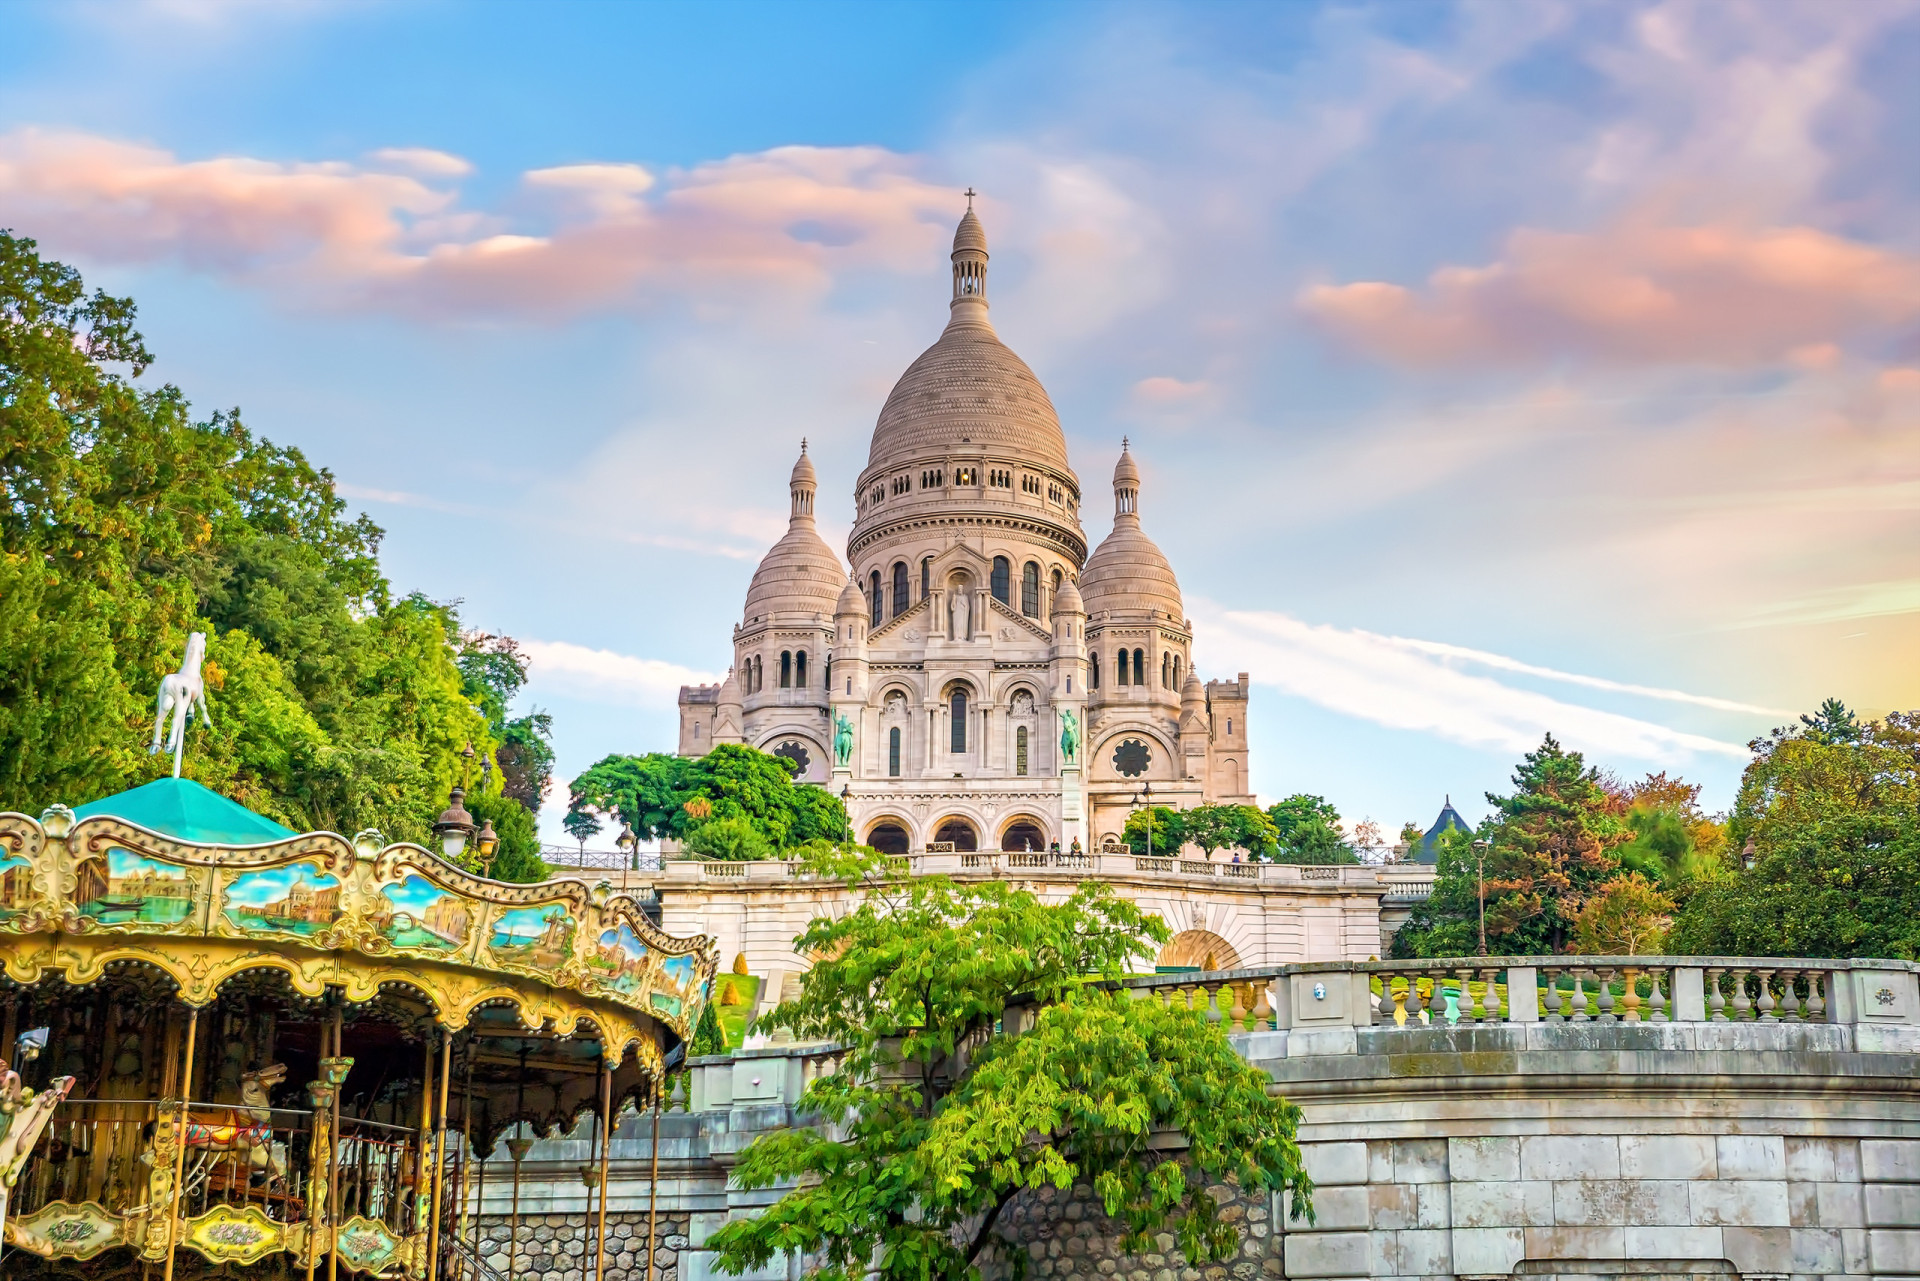 <p>You will find that Paris can be picture-perfect. Just imagine seeing famous monuments like the Sacré Coeur and the Arc de Triomphe for the first time. It's an unforgettable feeling.</p><p><a href="https://www.msn.com/en-us/community/channel/vid-7xx8mnucu55yw63we9va2gwr7uihbxwc68fxqp25x6tg4ftibpra?cvid=94631541bc0f4f89bfd59158d696ad7e">Follow us and access great exclusive content every day</a></p>